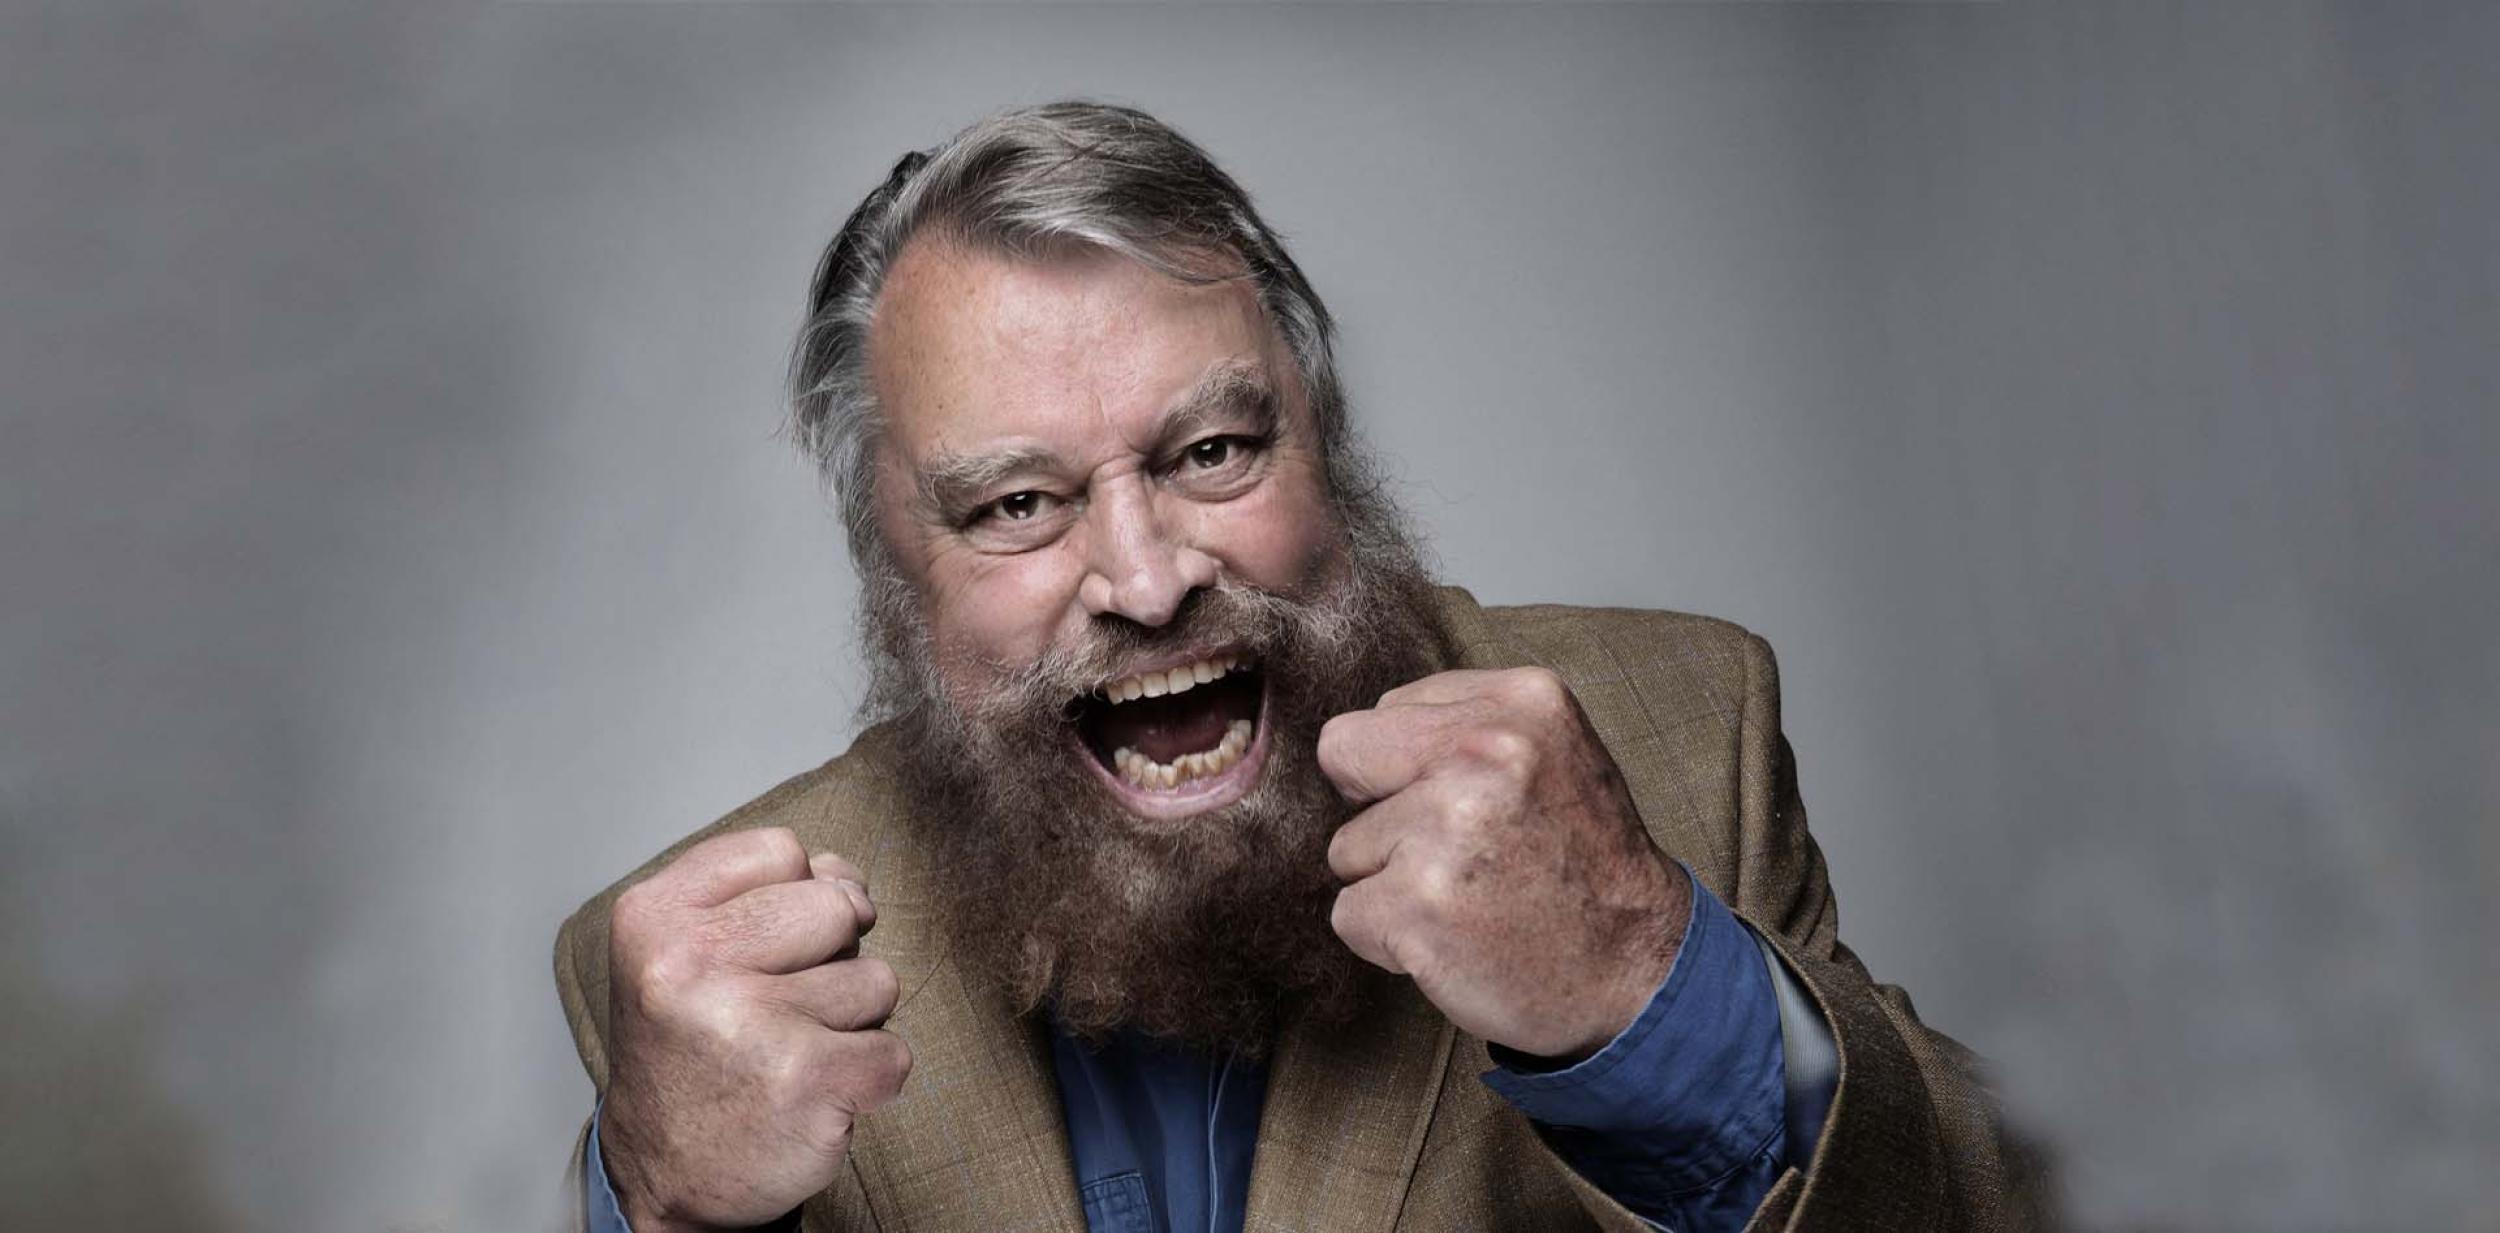 Brian Blessed with full beard and fists clenched